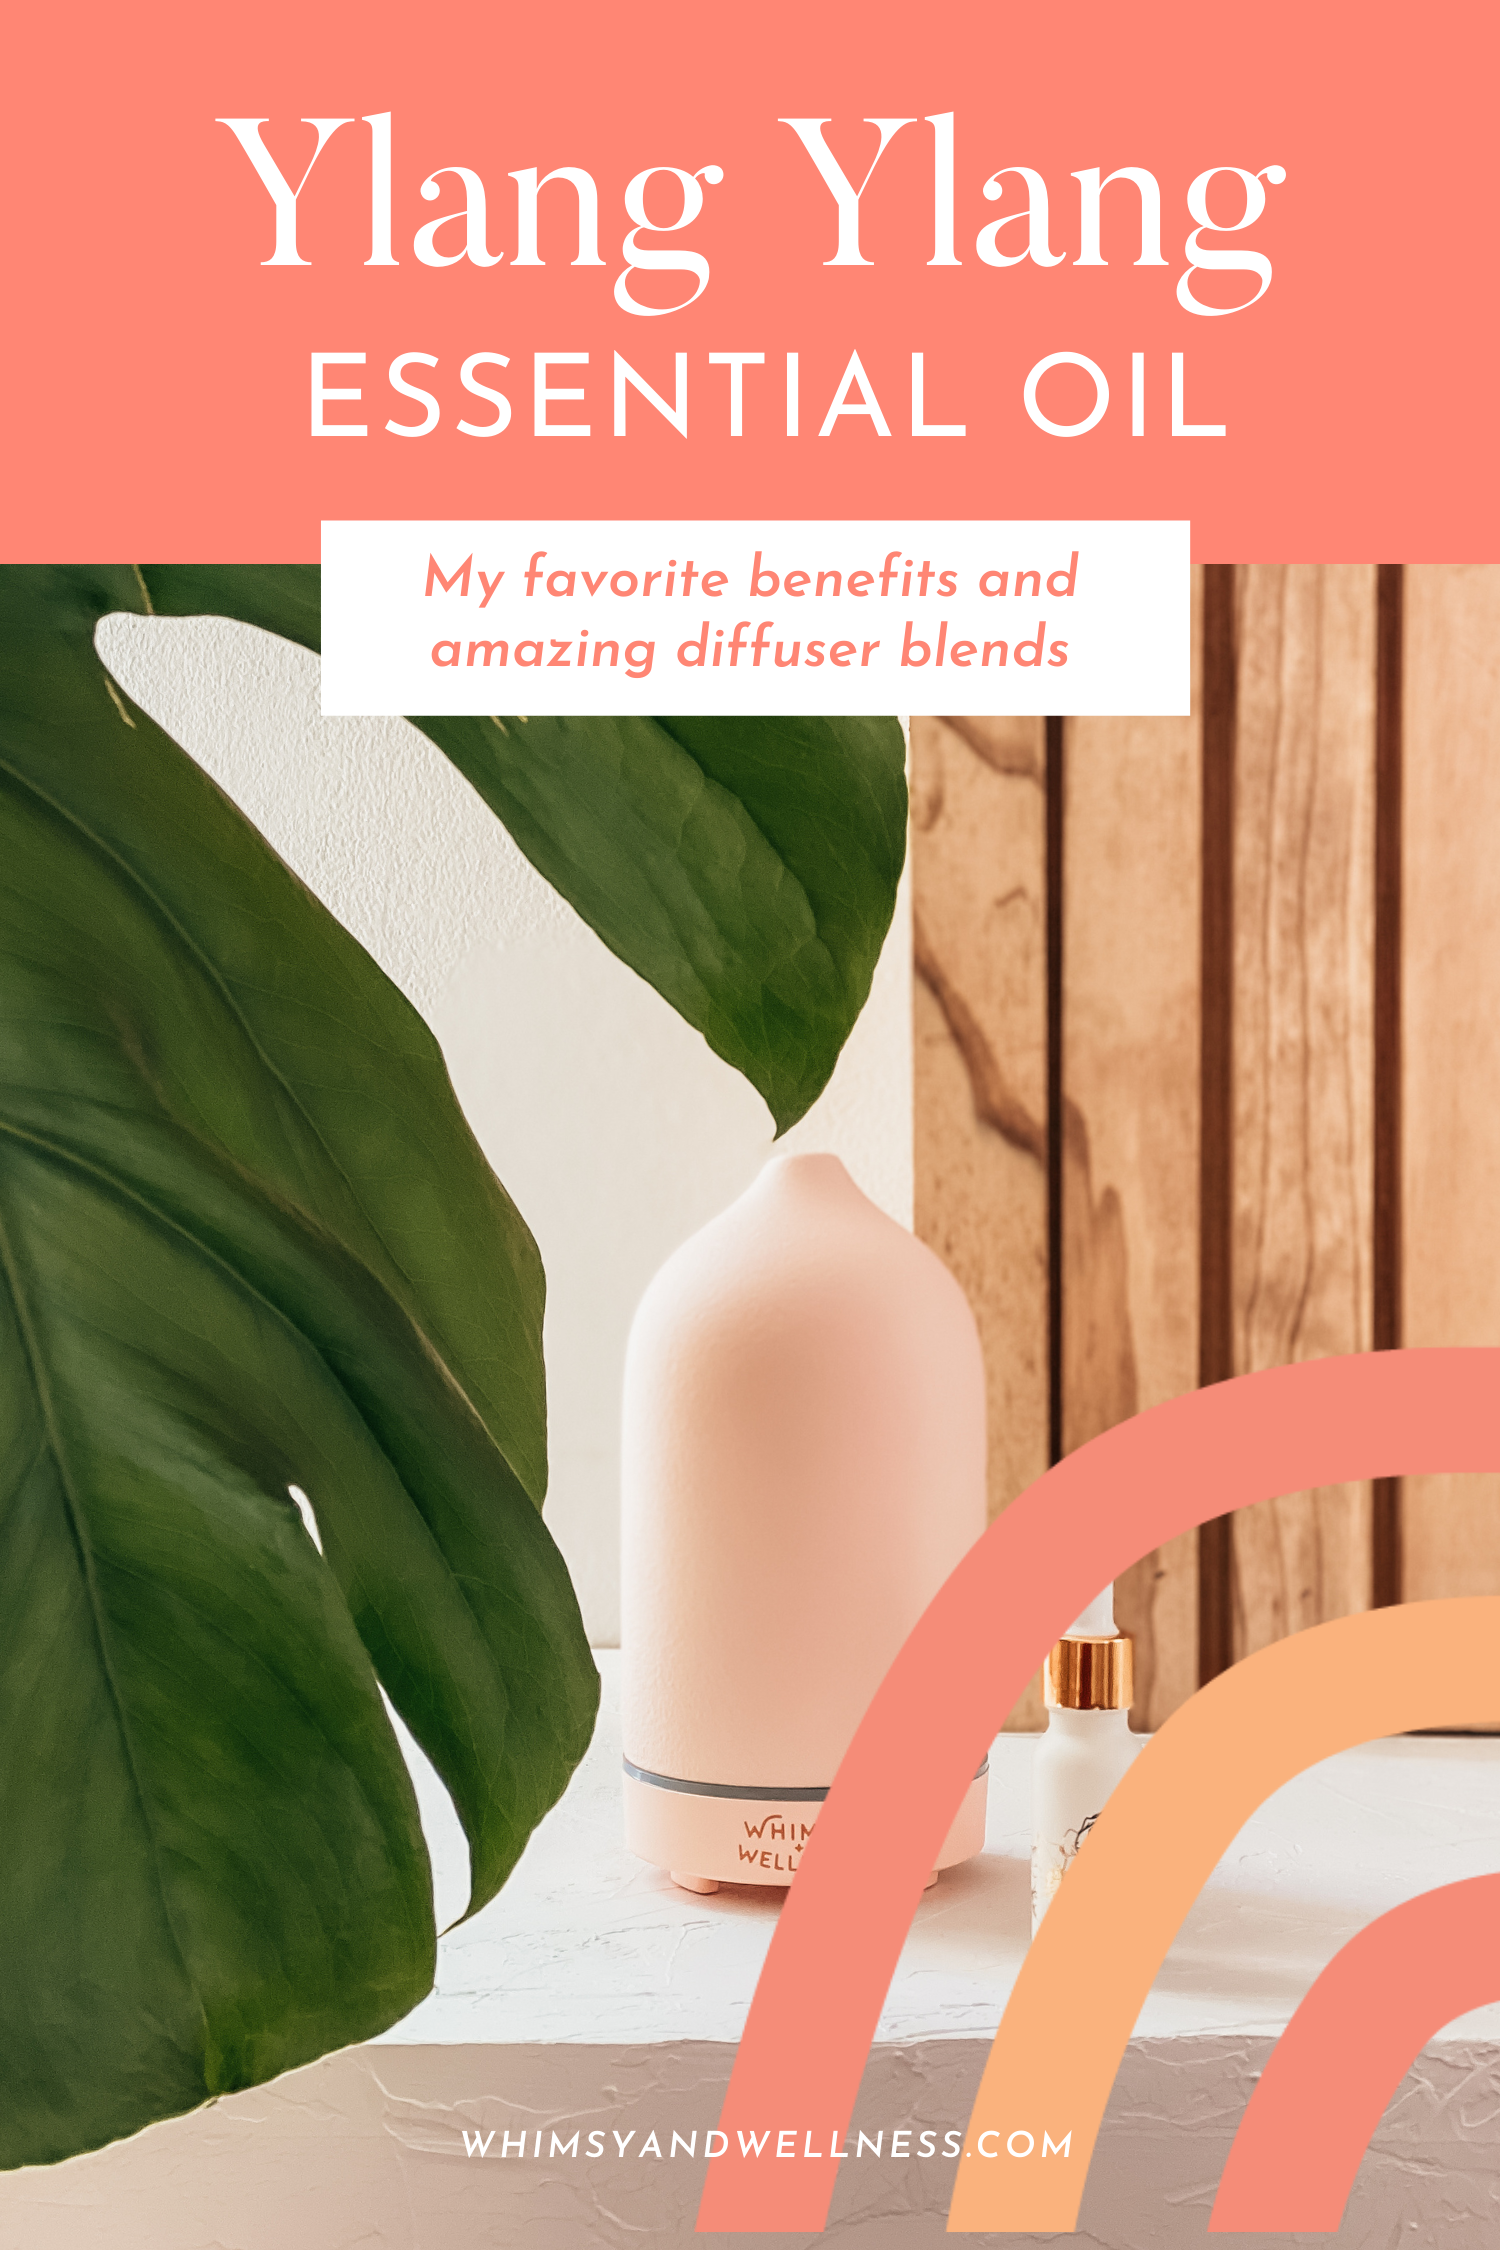 Aroma & Essential Oil Diffuser Blends